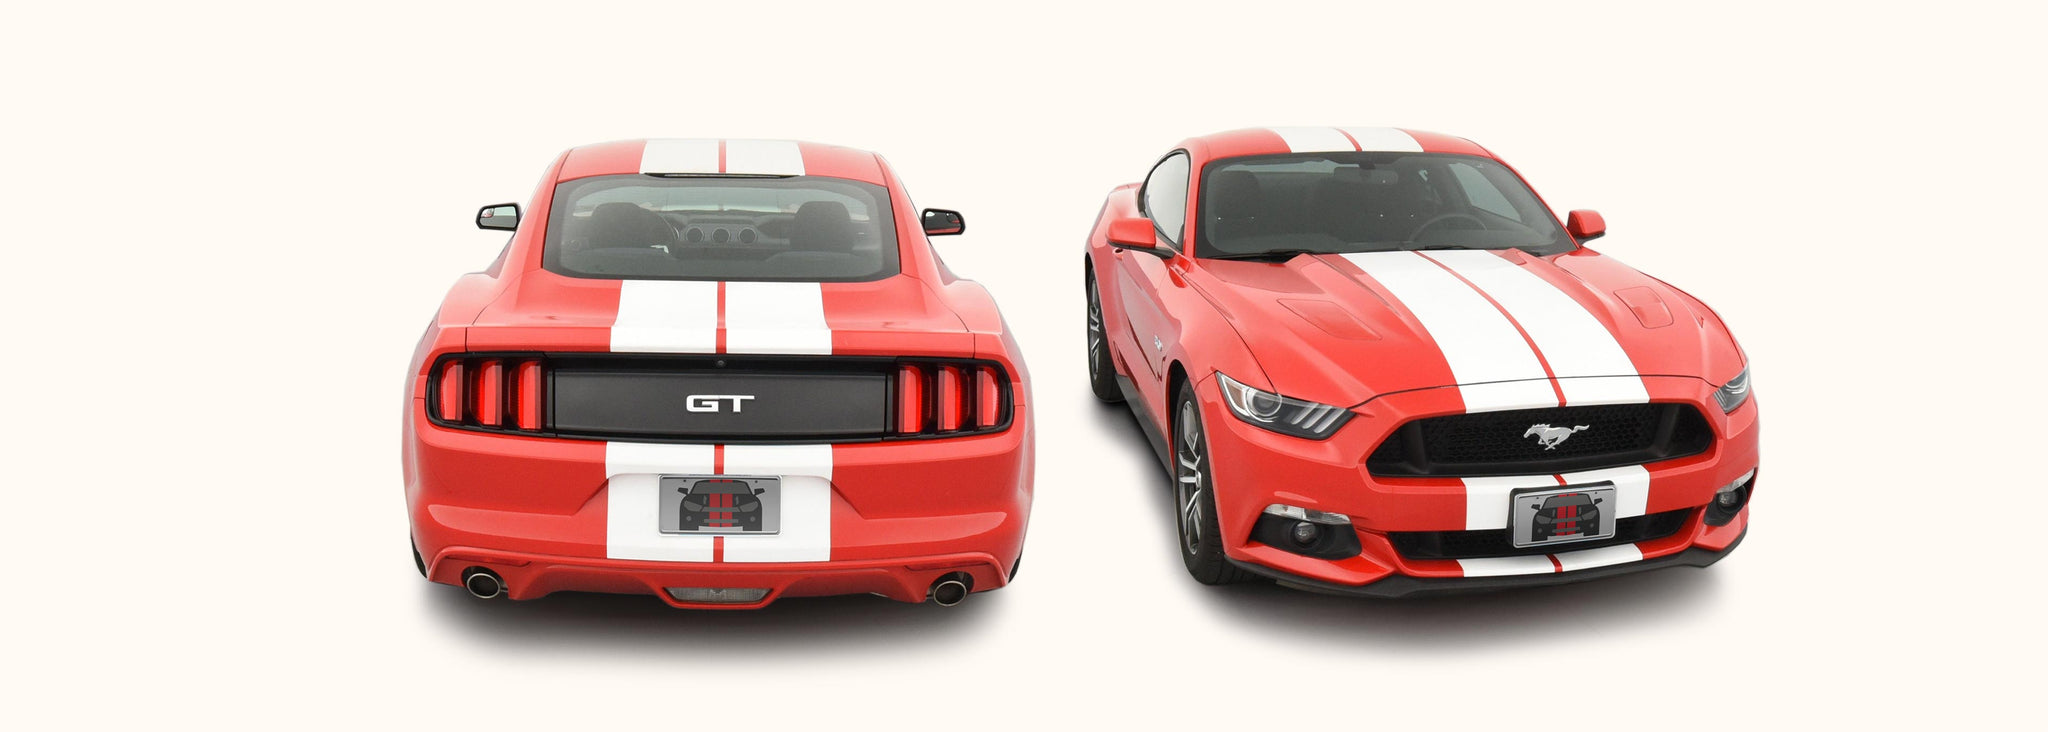 Ford Mustang Dual Rally Racing Stripes with Optional Pinstriping (2015-2017) - Stripe Source